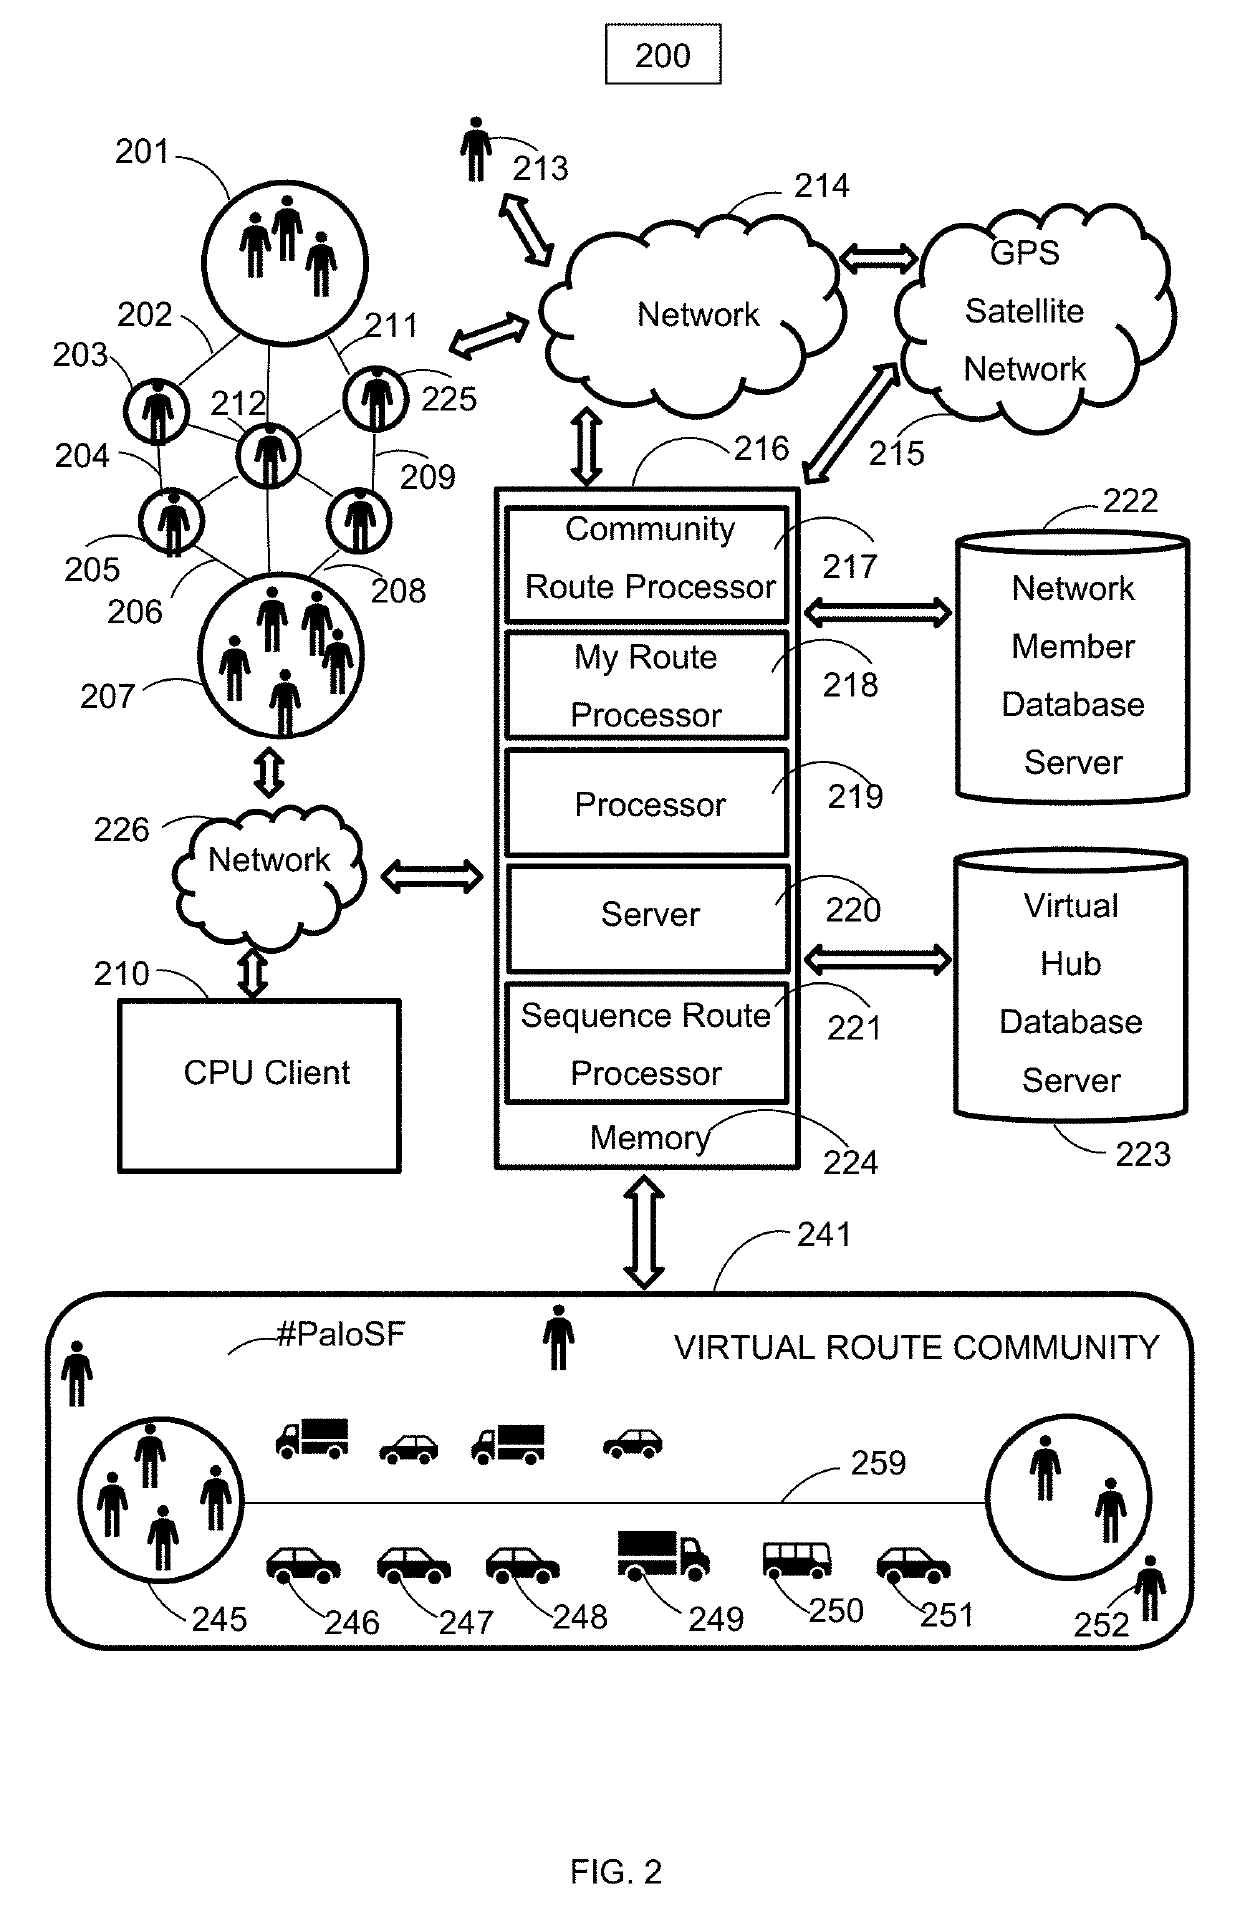 Navigation routes as community object virtual hub sequences to which users may subscribe